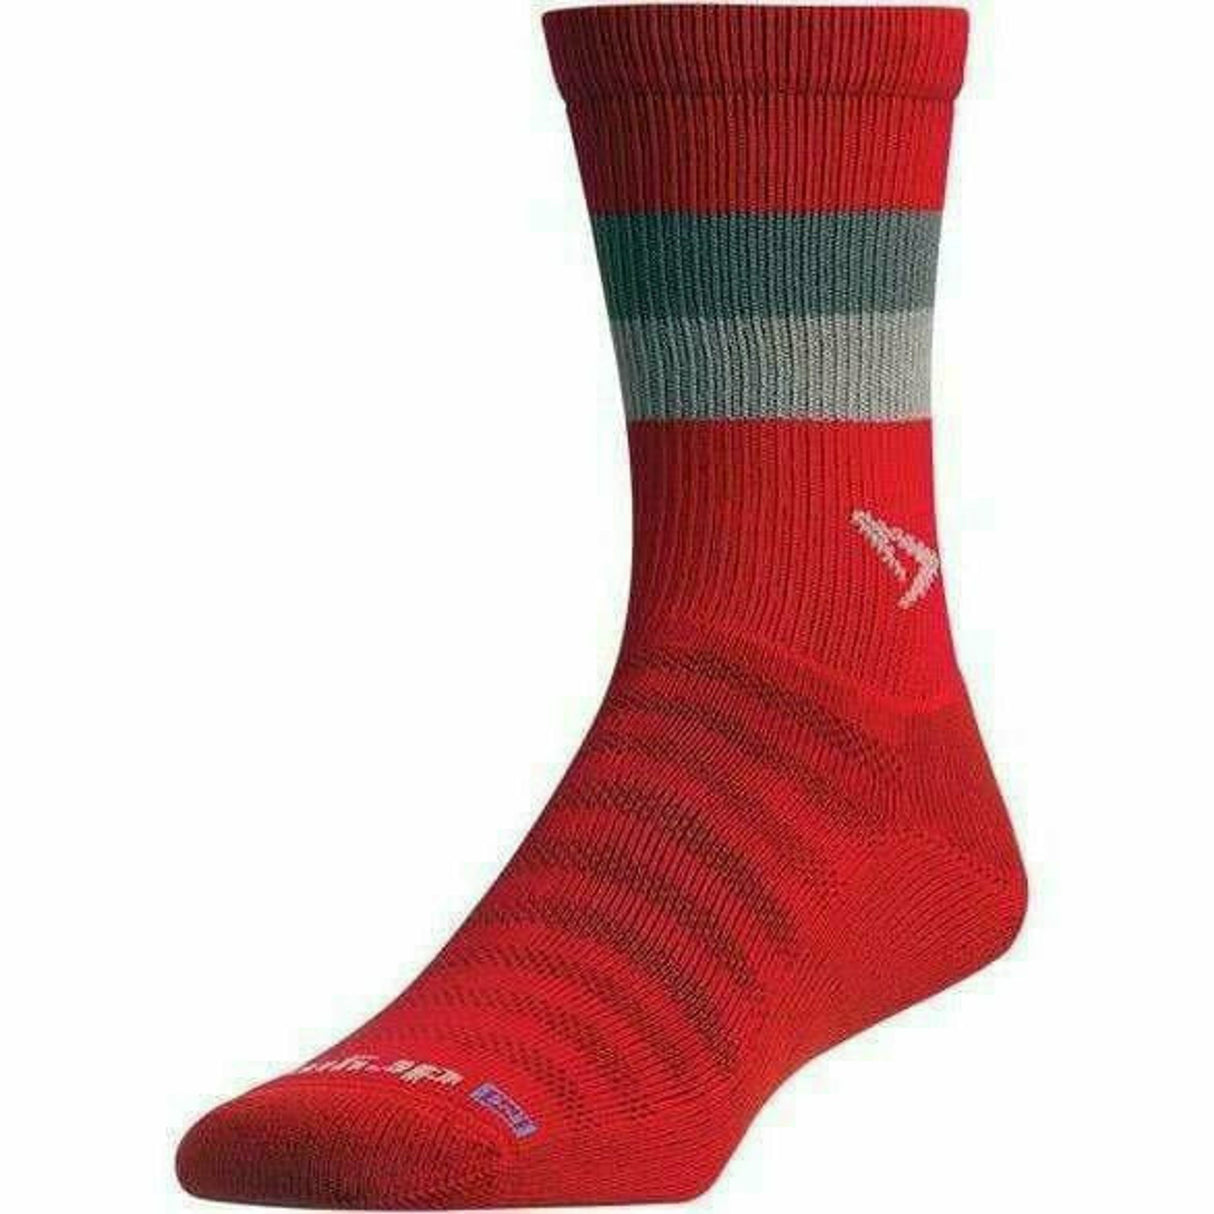 Drymax Running Lite-Mesh Crew Socks  -  Small / Red with Anthracite/Gray